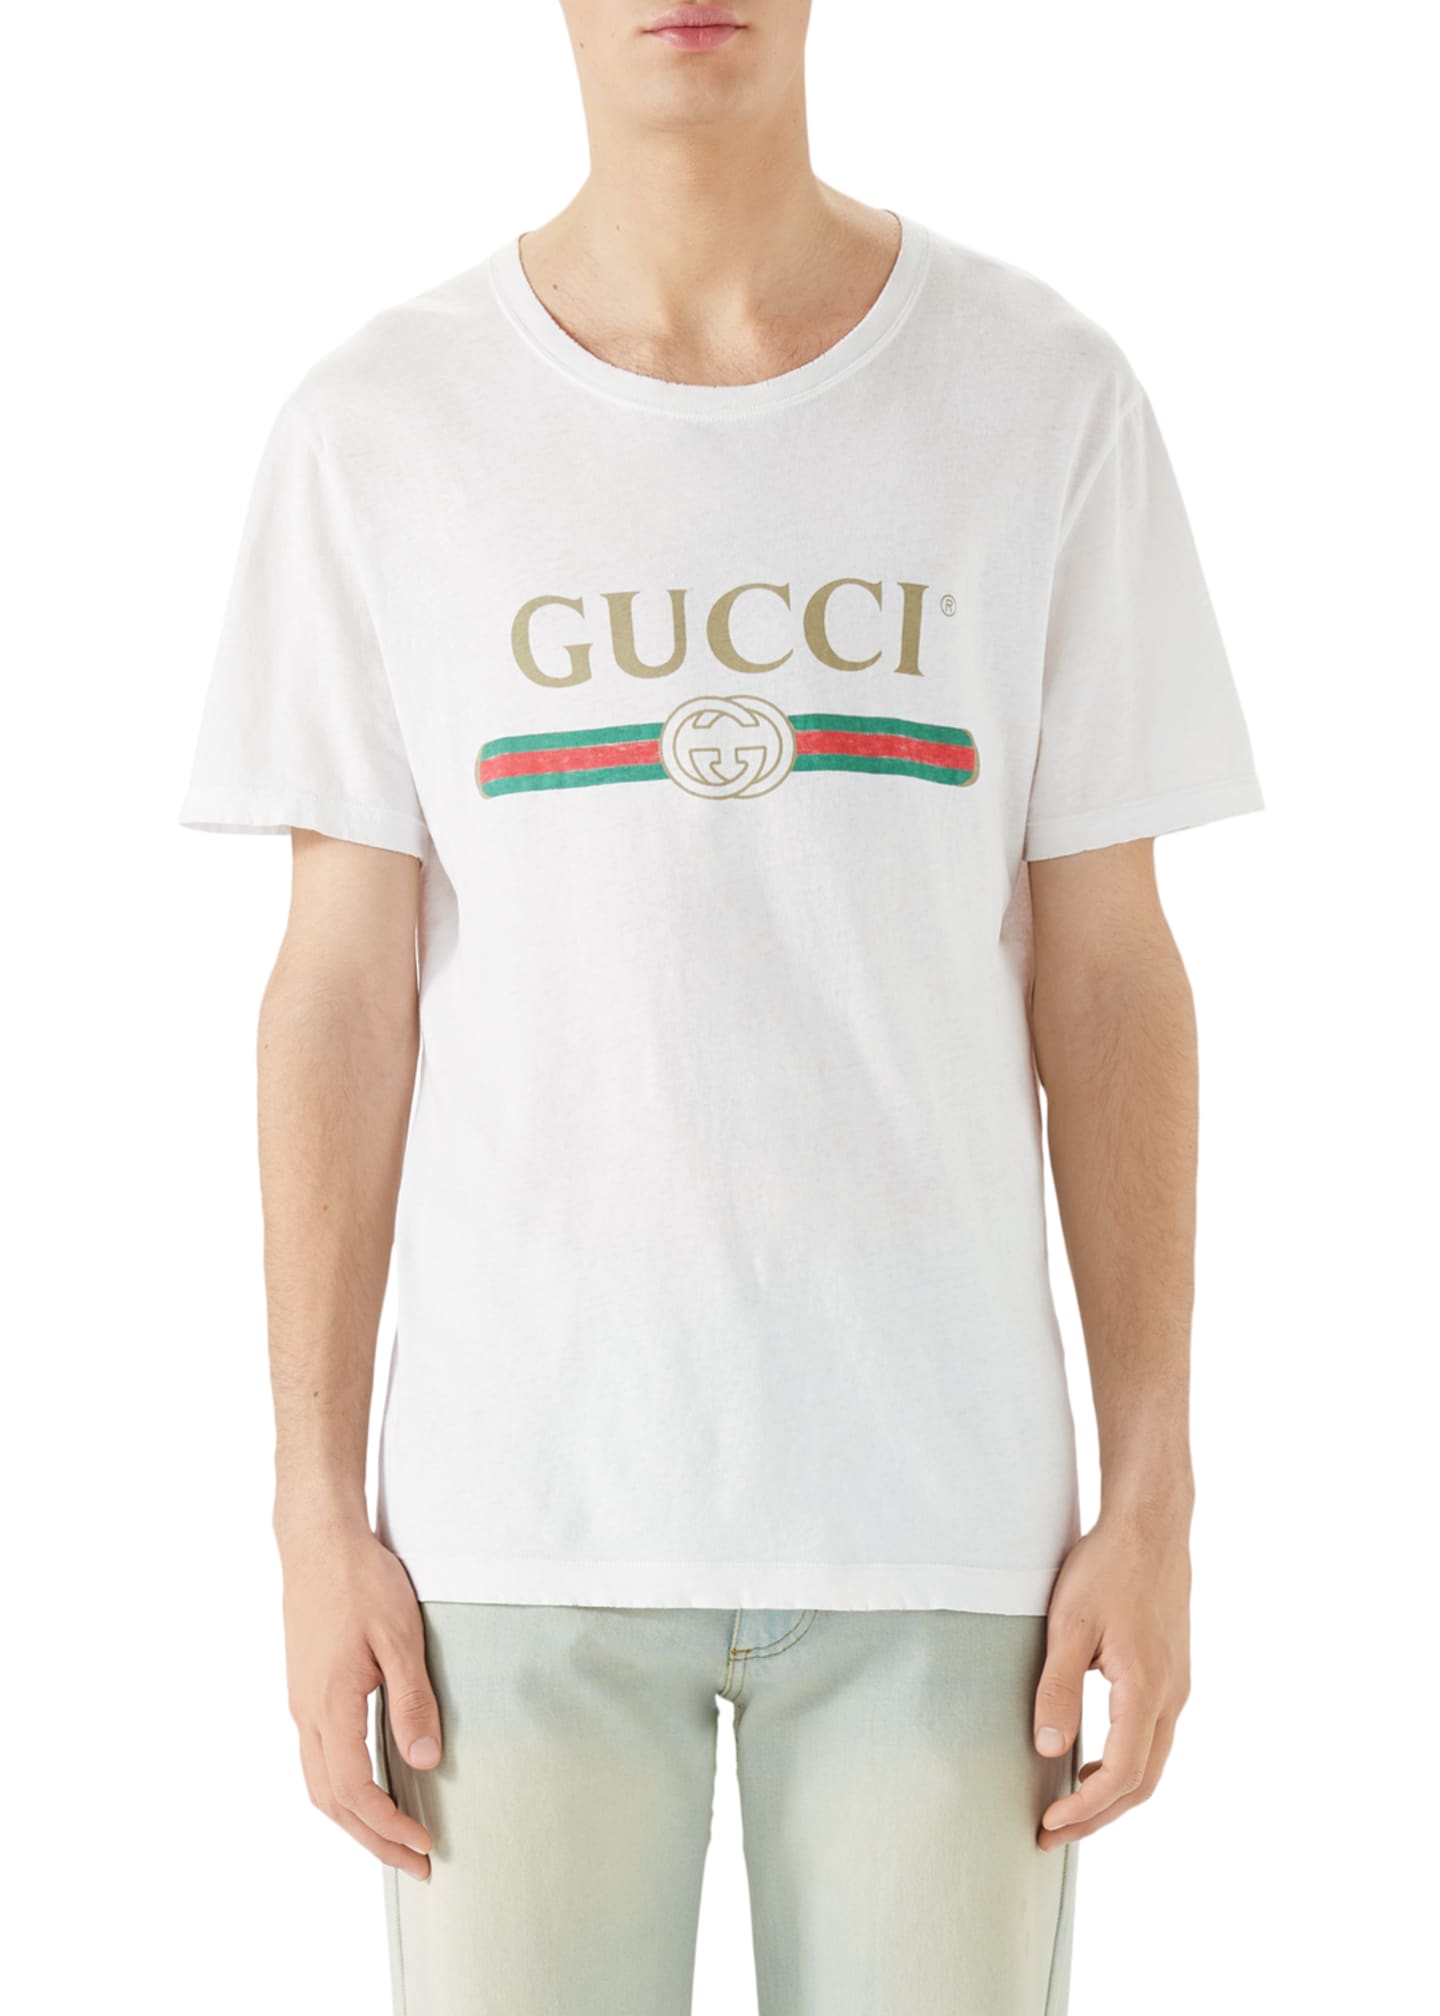 gucci washed t shirt, OFF 78%,www 